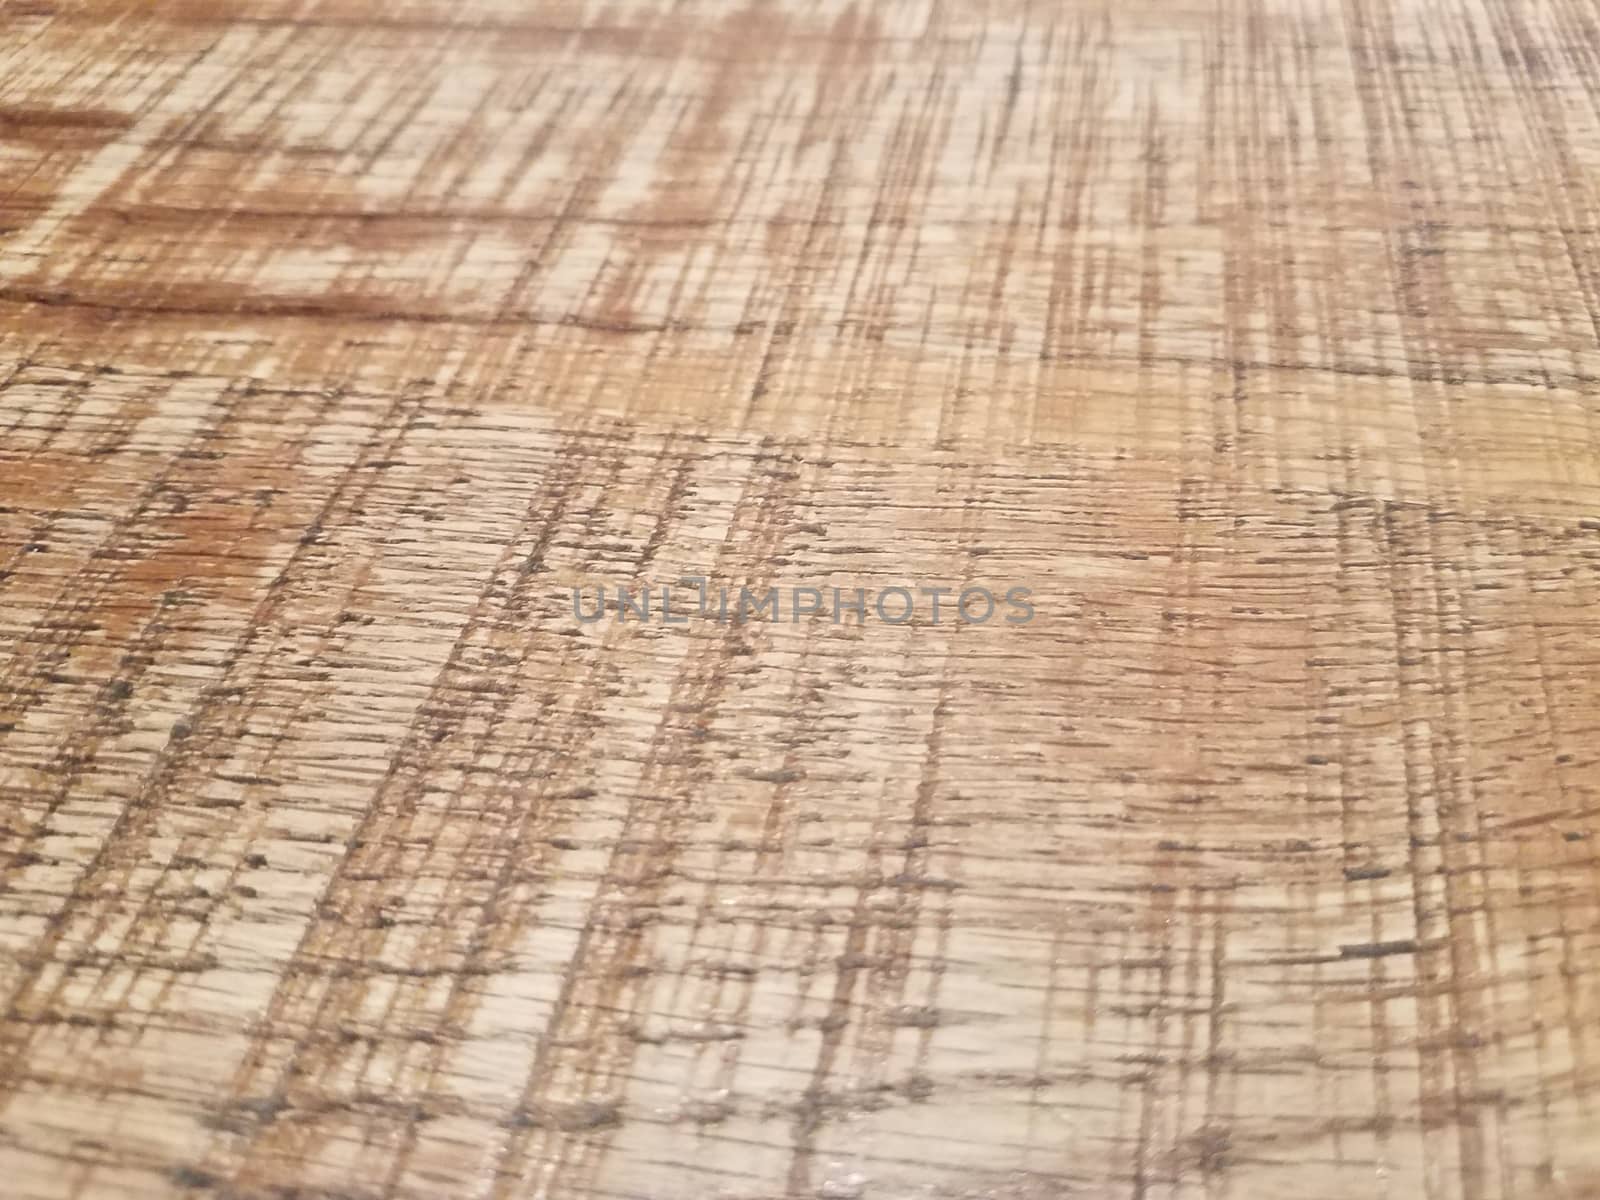 worn brown wood table or surface up close by stockphotofan1